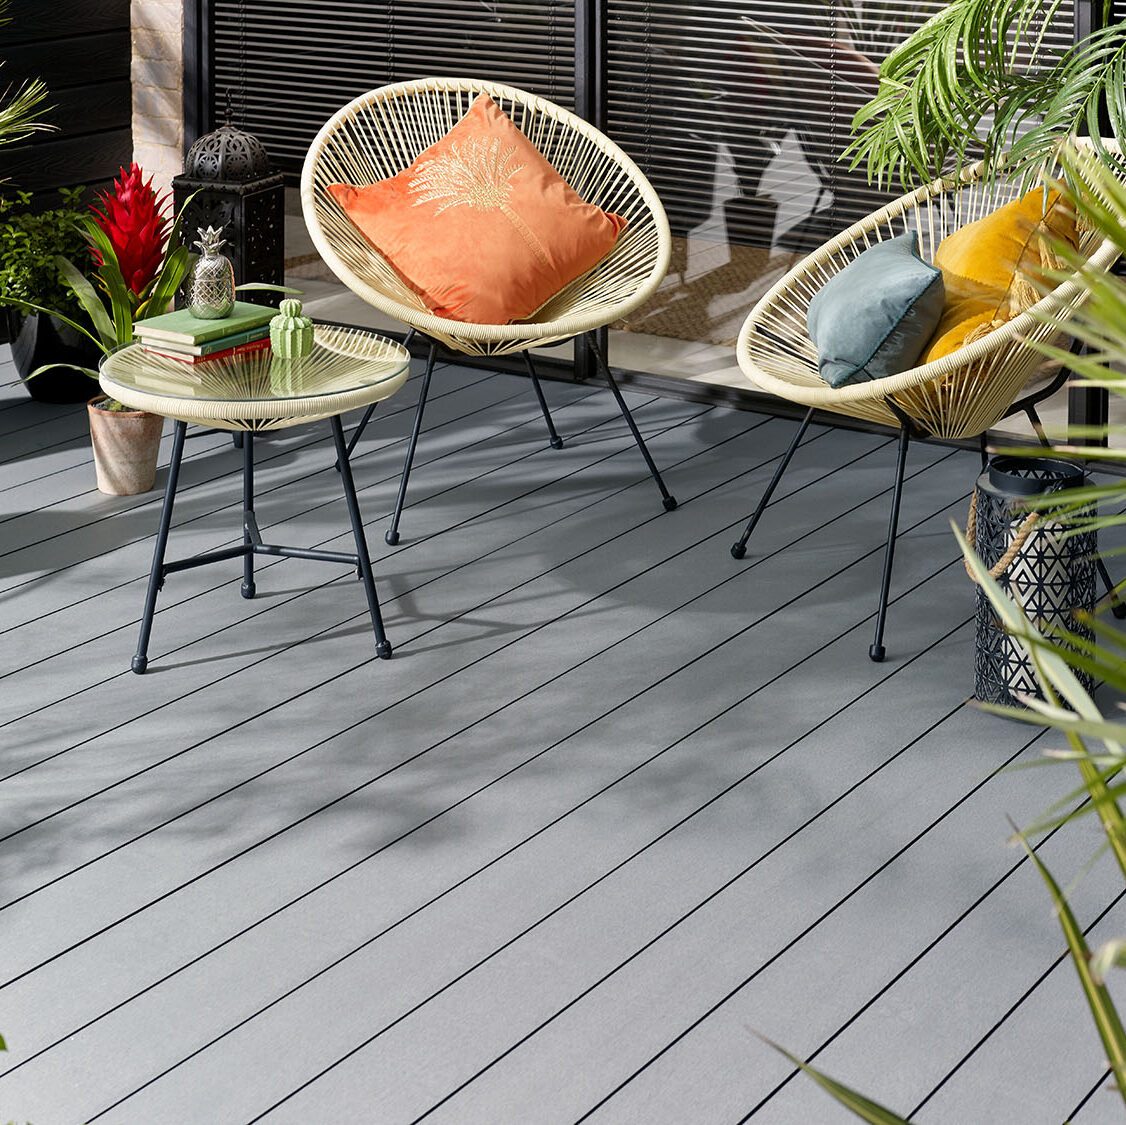 Grey wood grain decked courtyard with two cream chairs and table surrounded by plants